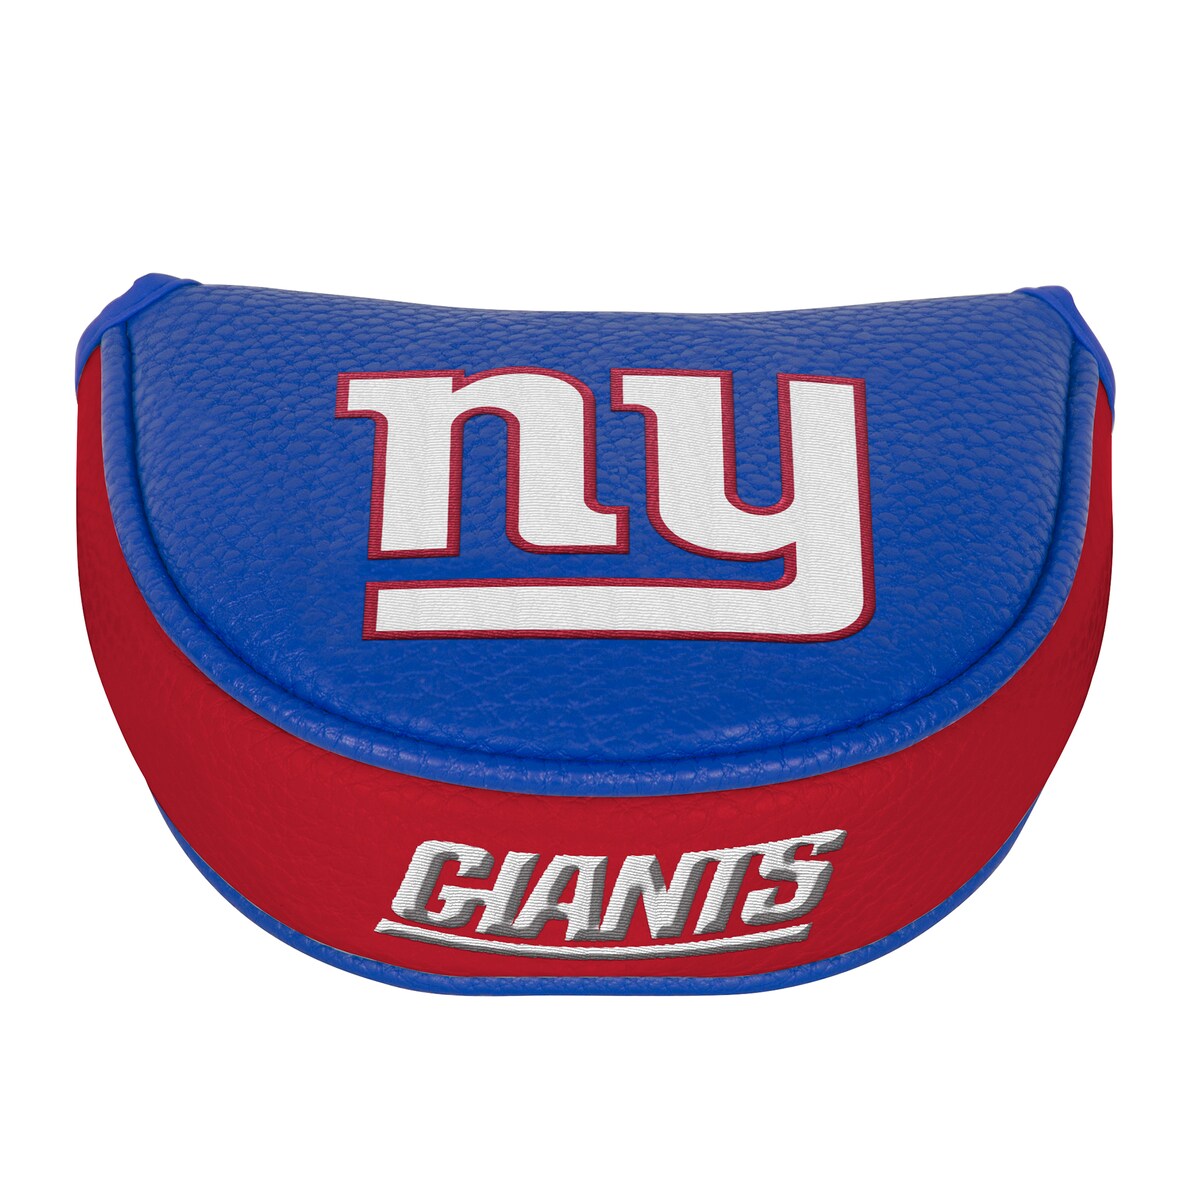 Showcase your devout New York Giants fandom out on the green with this mallet putter cover from WinCraft. On top of shielding your club against minor scratches and dents, it features bold New York Giants graphics others can't miss while you're playing a round of 9 or 18.Officially licensedSurface washableEmbroidered graphicsFits most standard mallet puttersImportedBrand: WinCraft